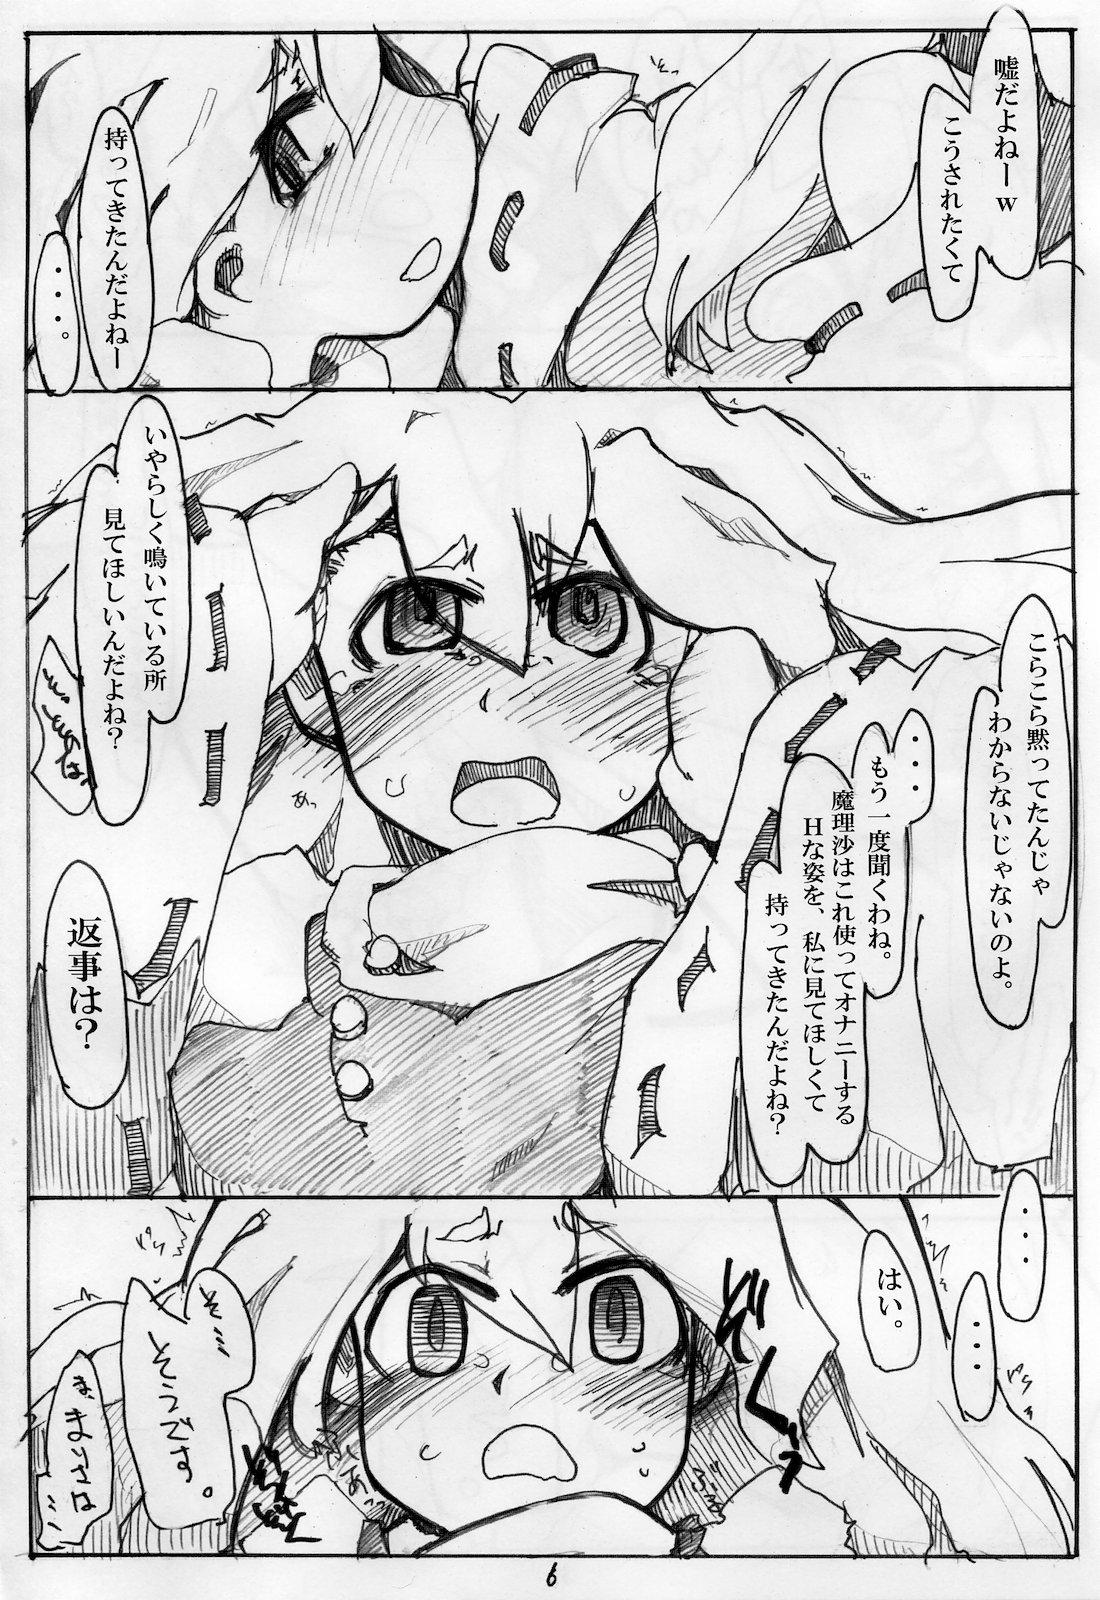 Longhair ONANIE - Touhou project Erotica - Page 5